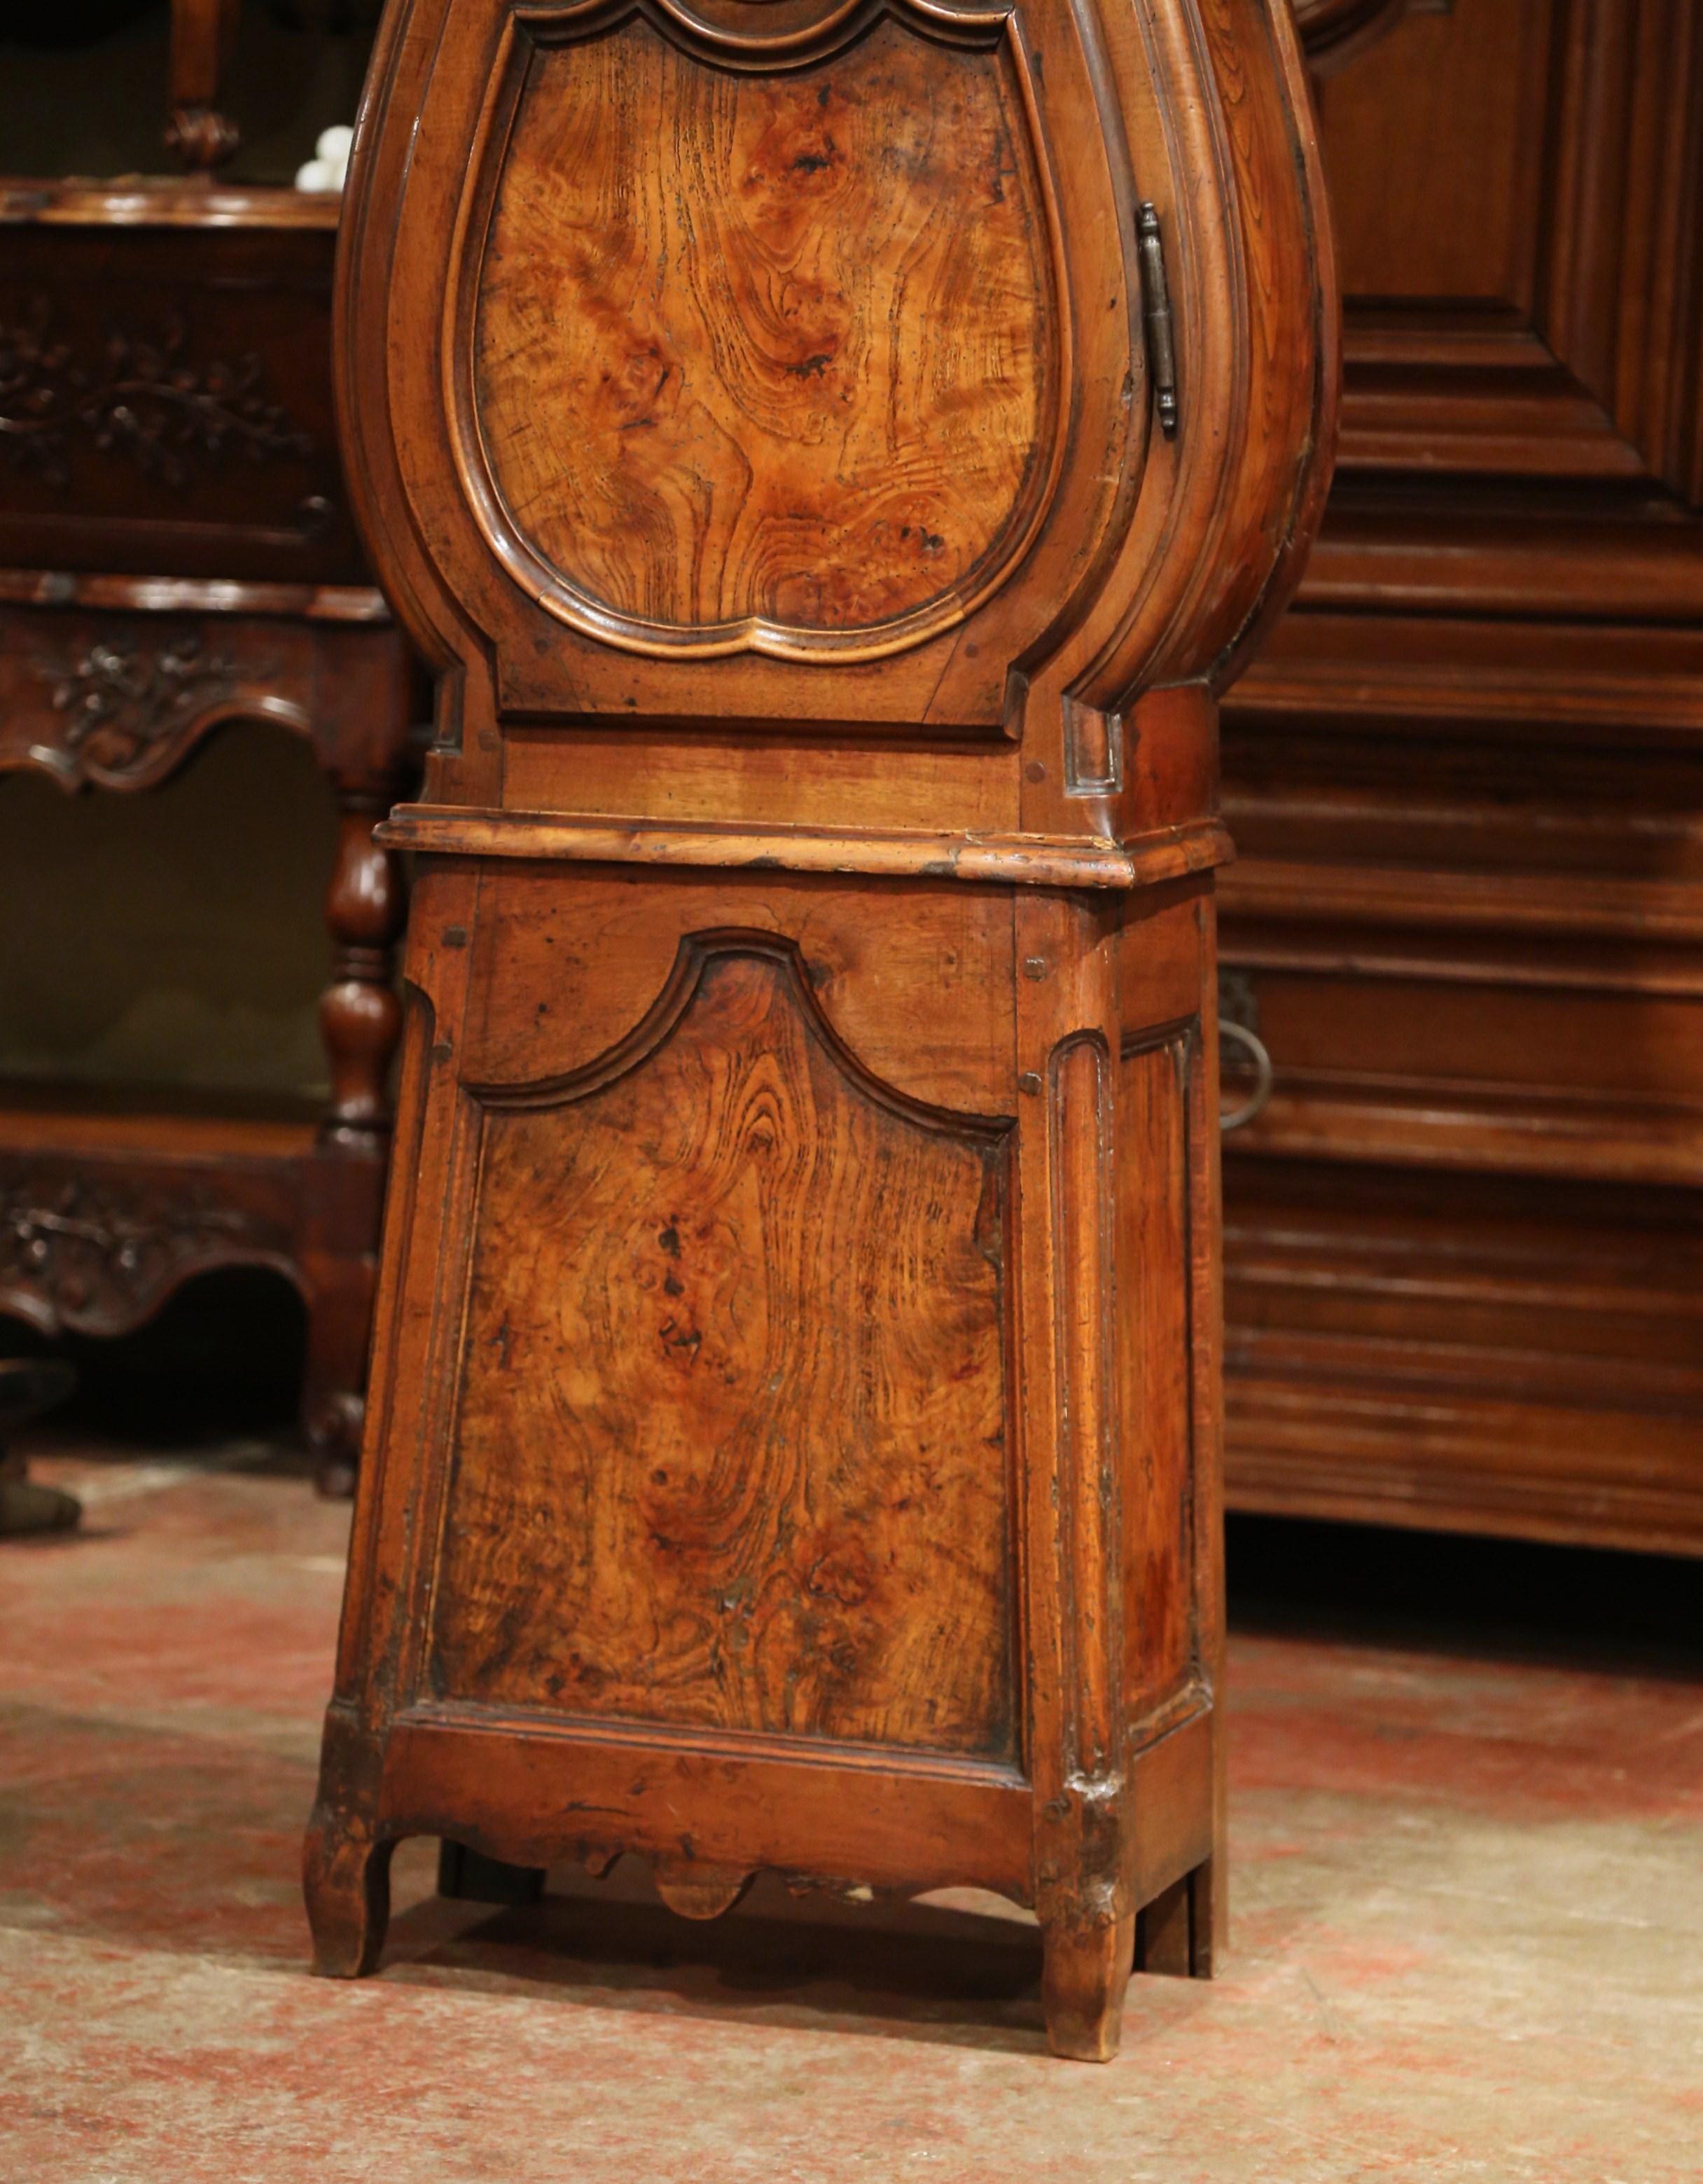 Late 18th Century French Louis XV Carved Burl Walnut Tall Case Clock from Lyon 9